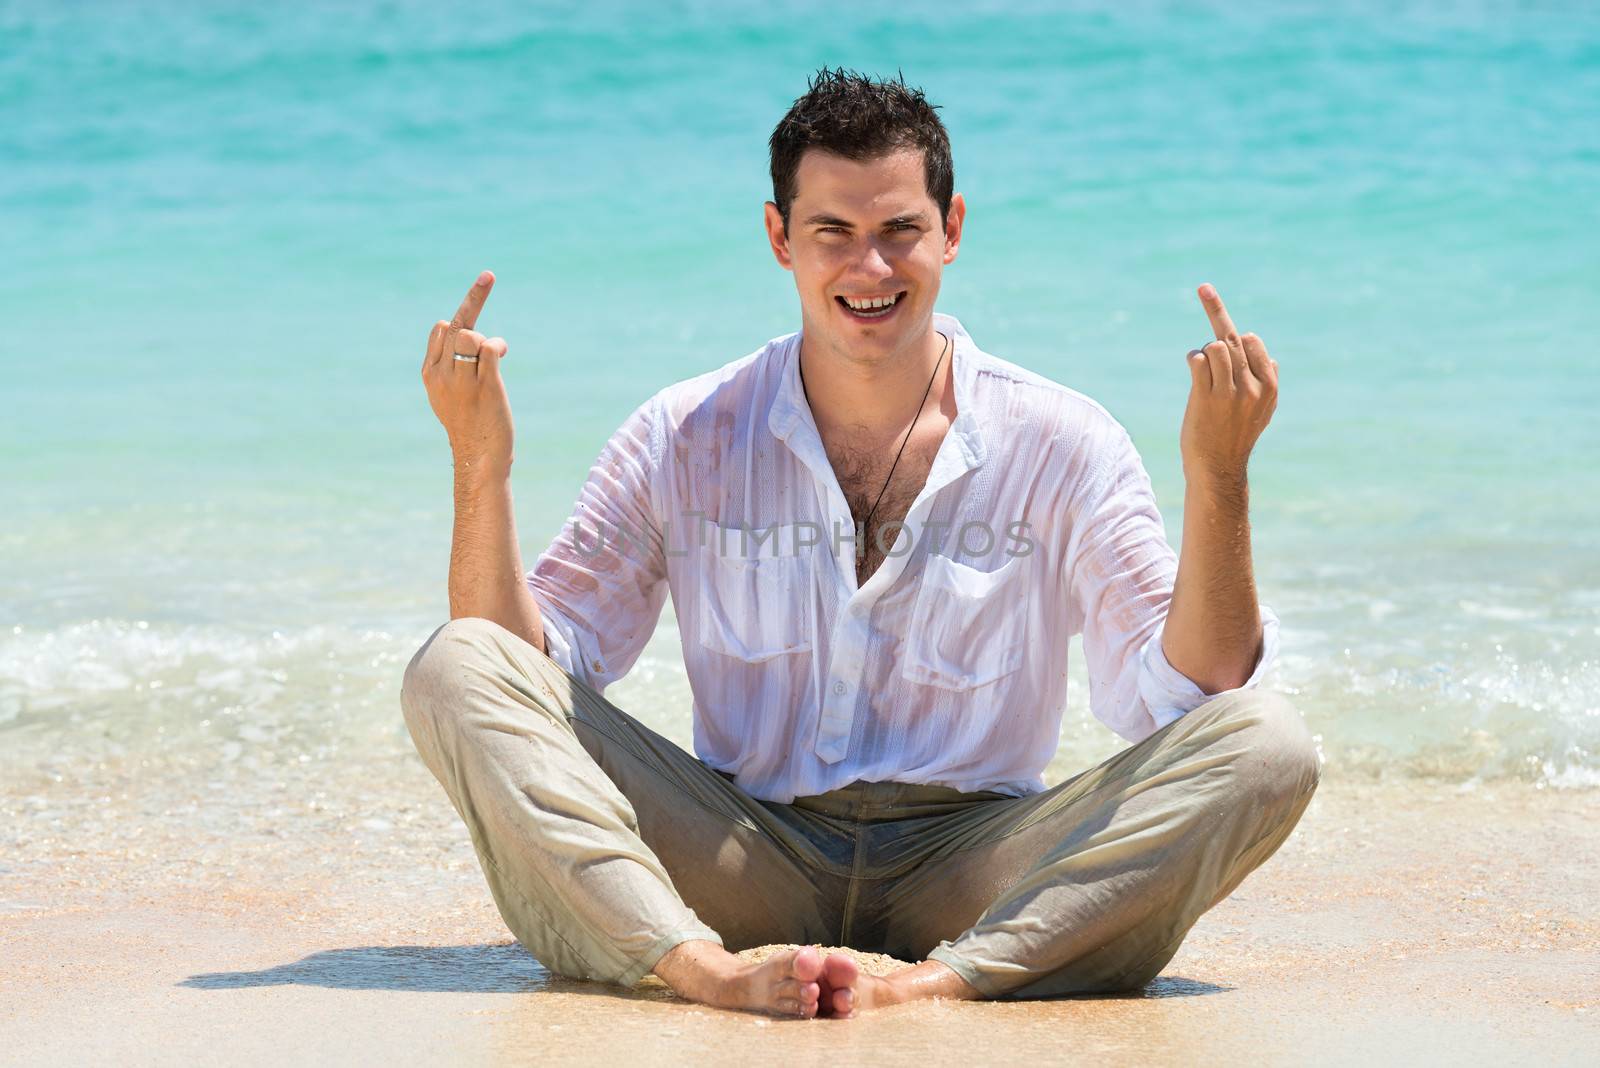 Happy man showing middle finger and enjoying at beach with blue sea on background